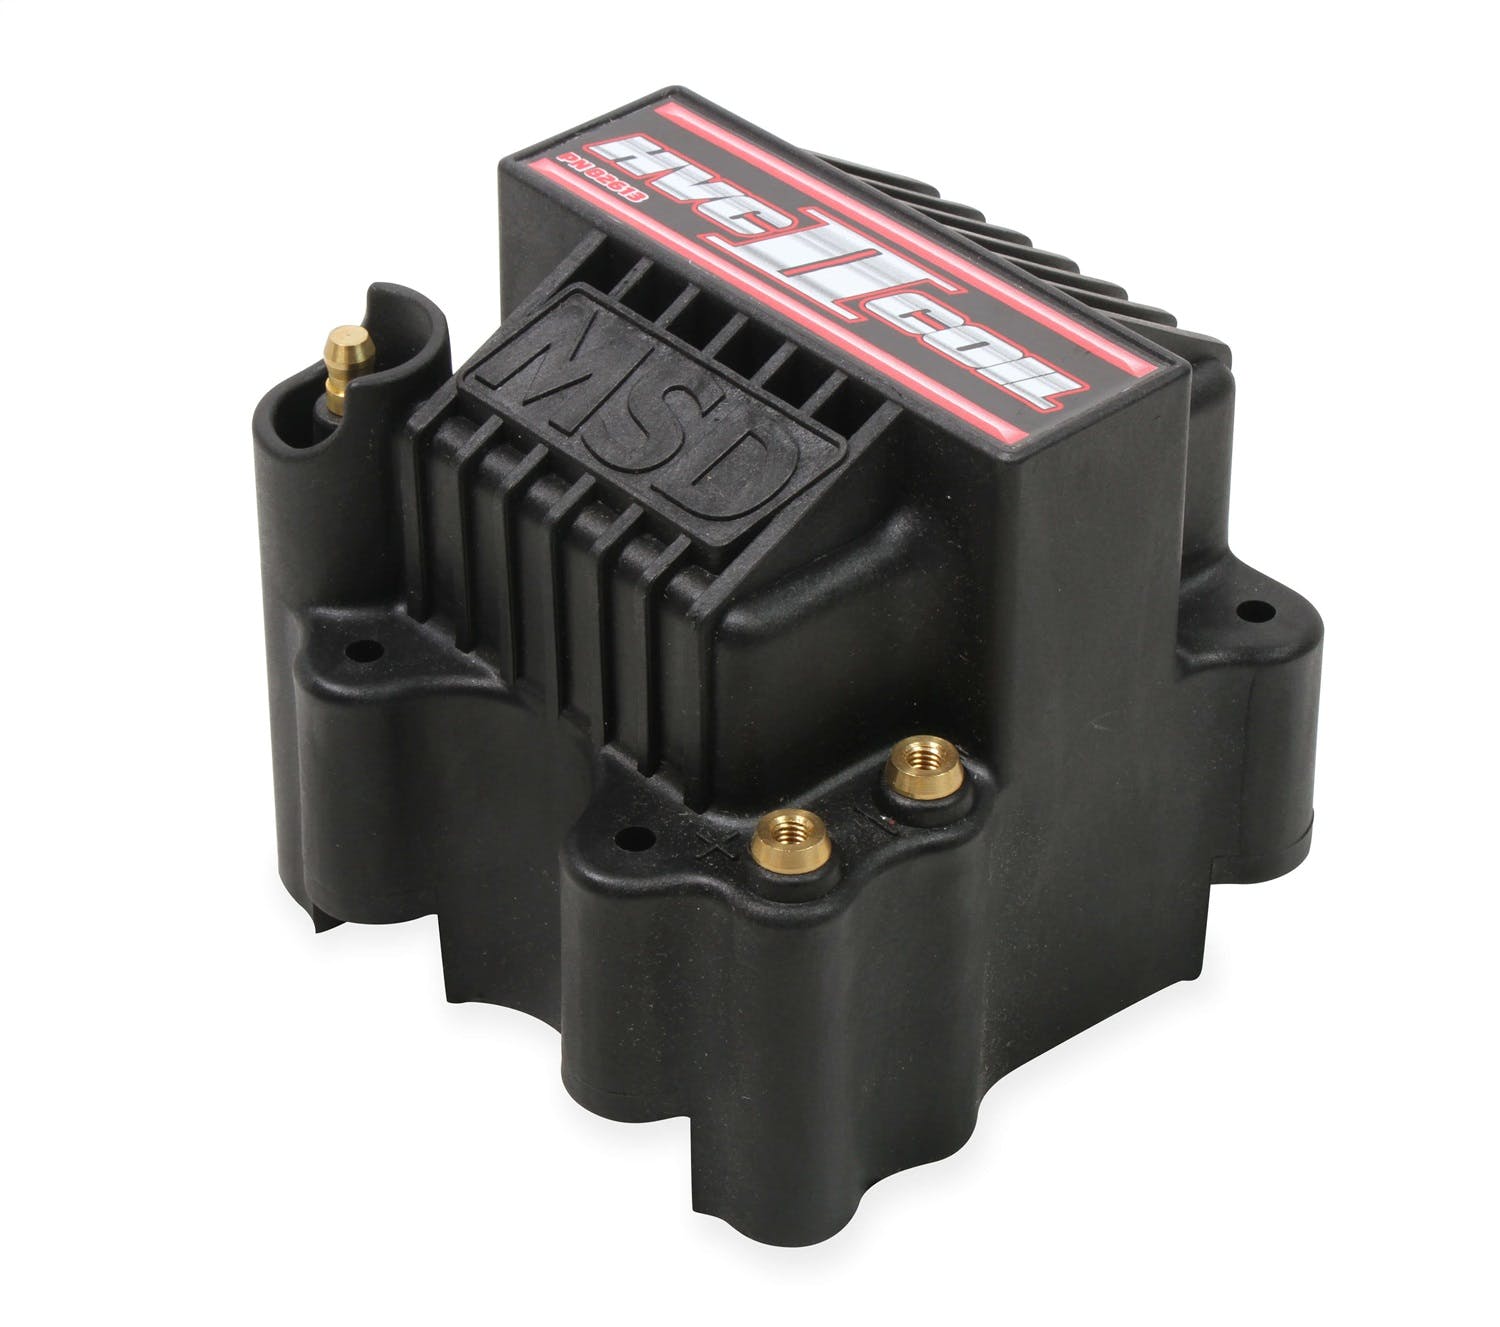 MSD Performance 82613 Black Ignition Coil, HVC-2,7 Series Ign.